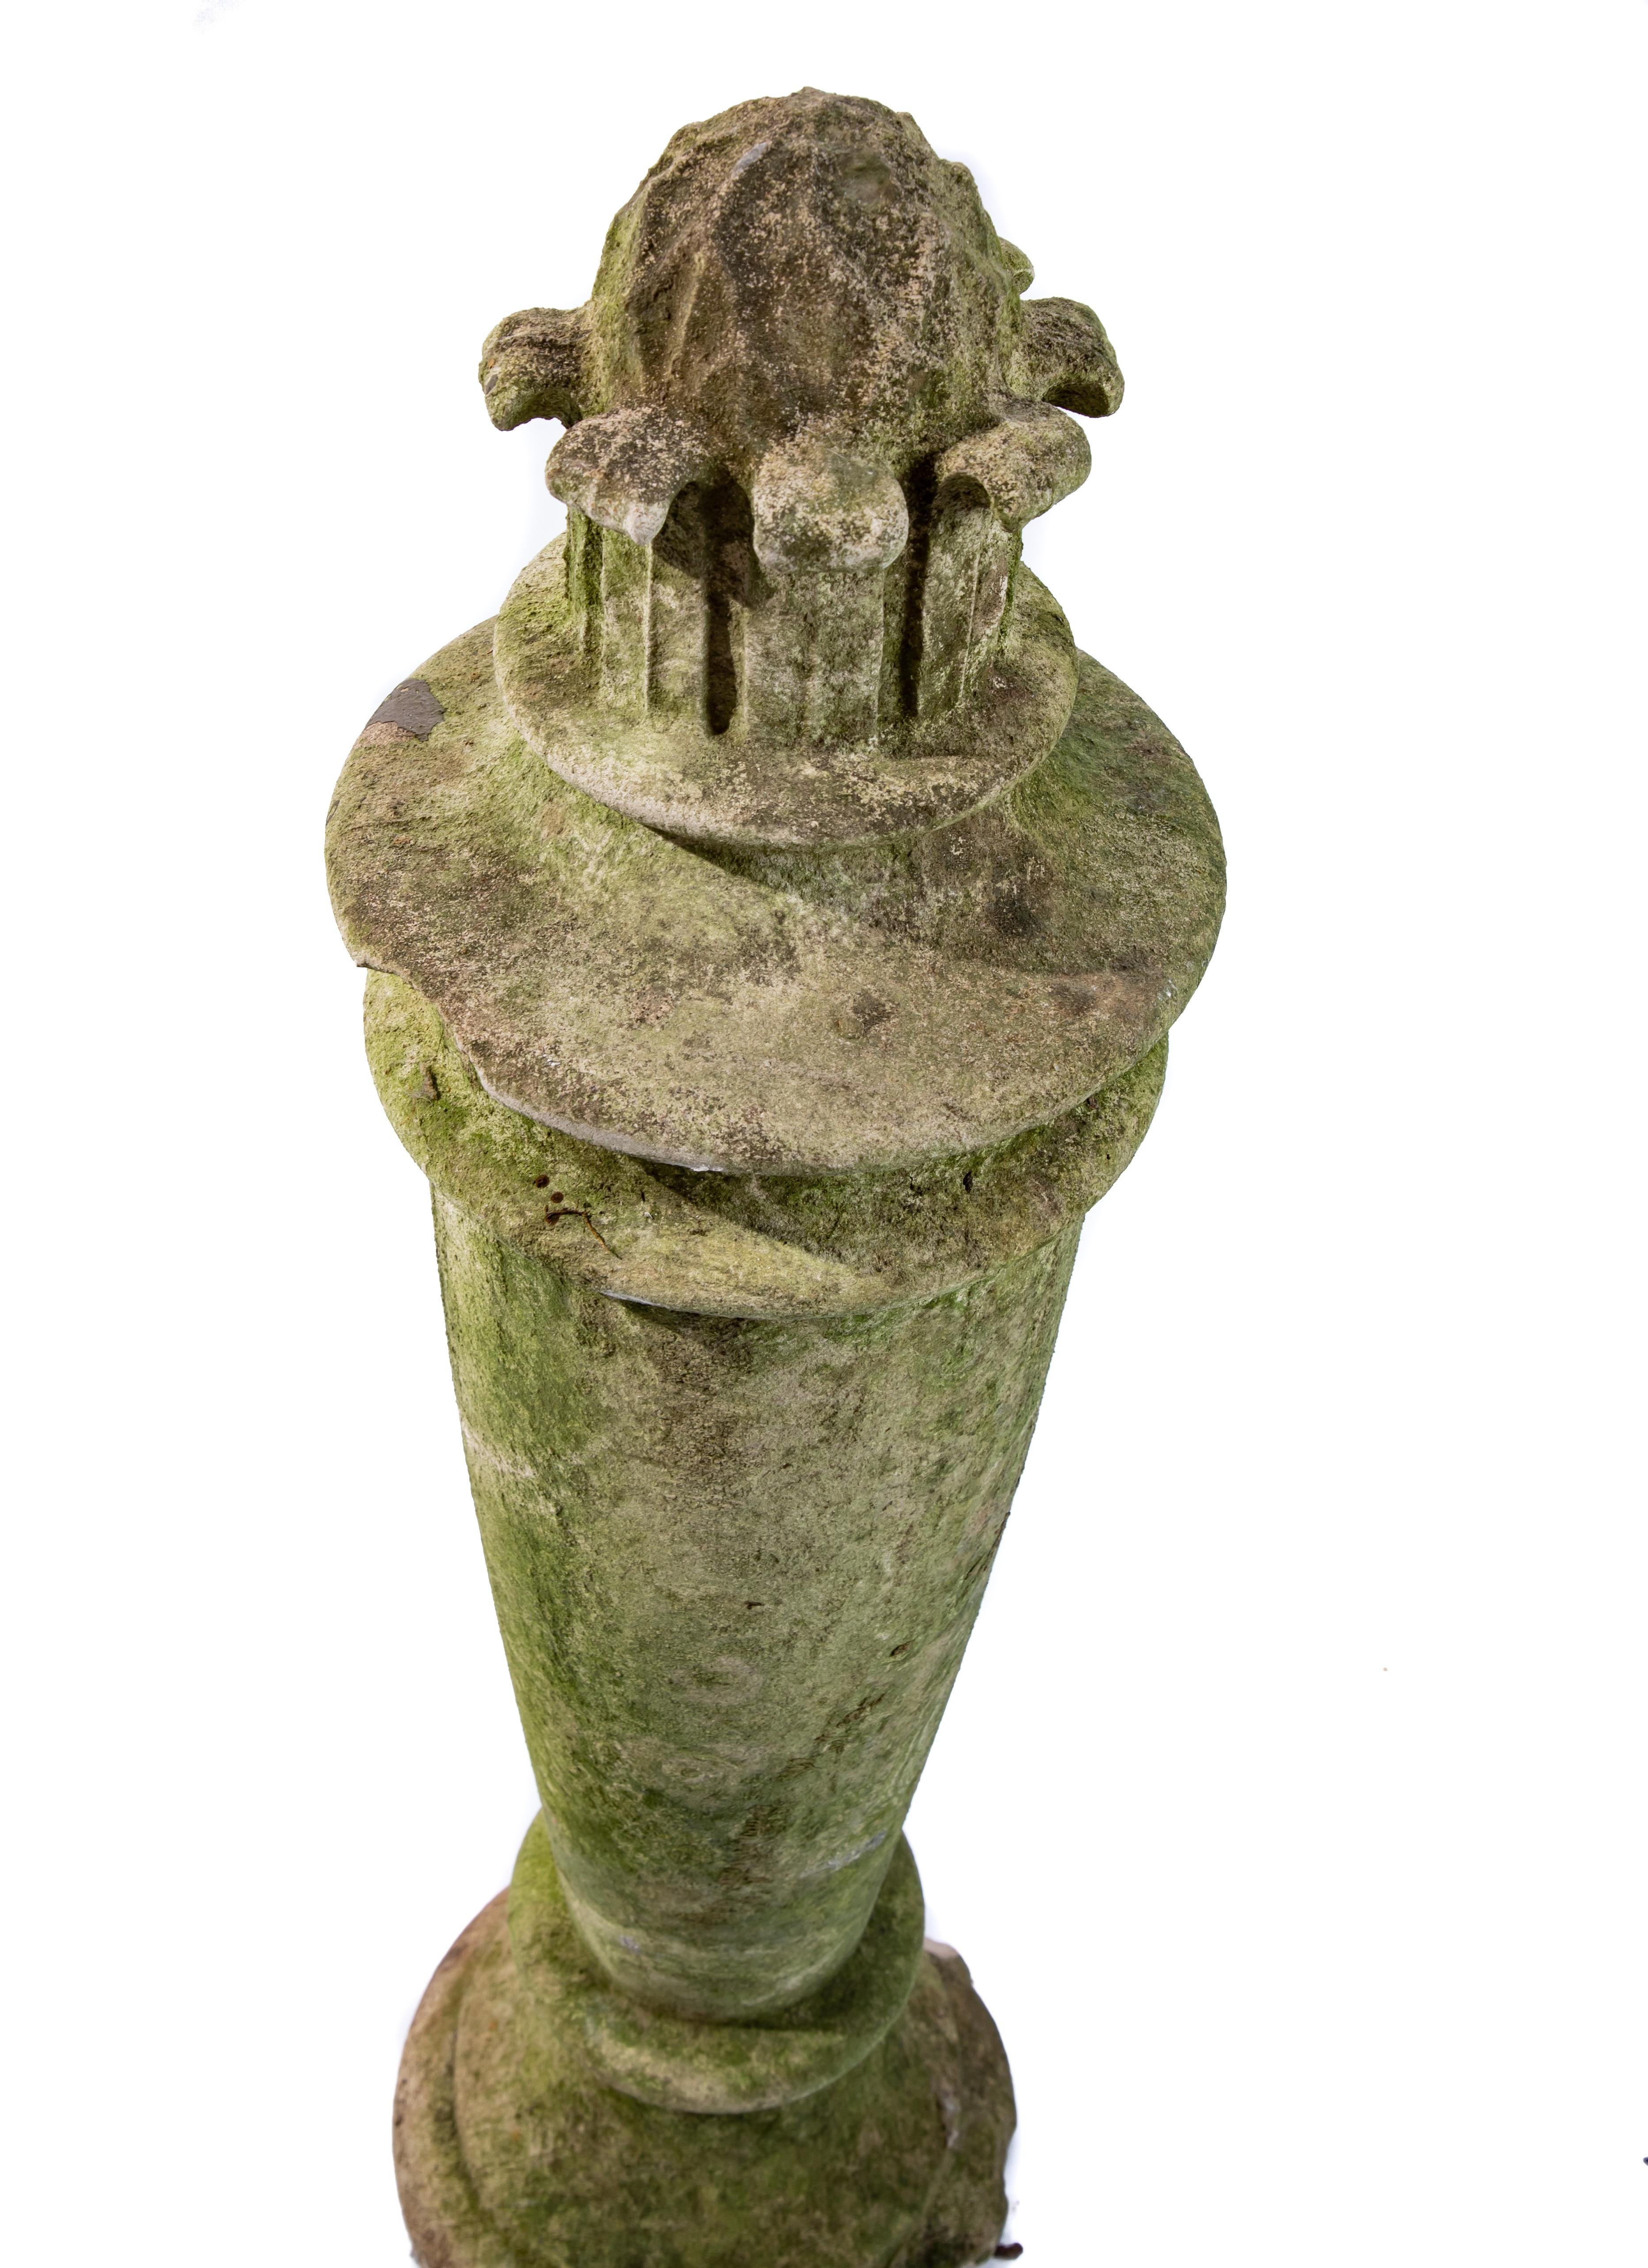 Offering this magnificent pair of garden pedestals. Note these are slightly chipped around the bottoms and the moss is still on them. Very round and urn like these gorgeous pieces will look great in any garden or entrance. They are topped with a